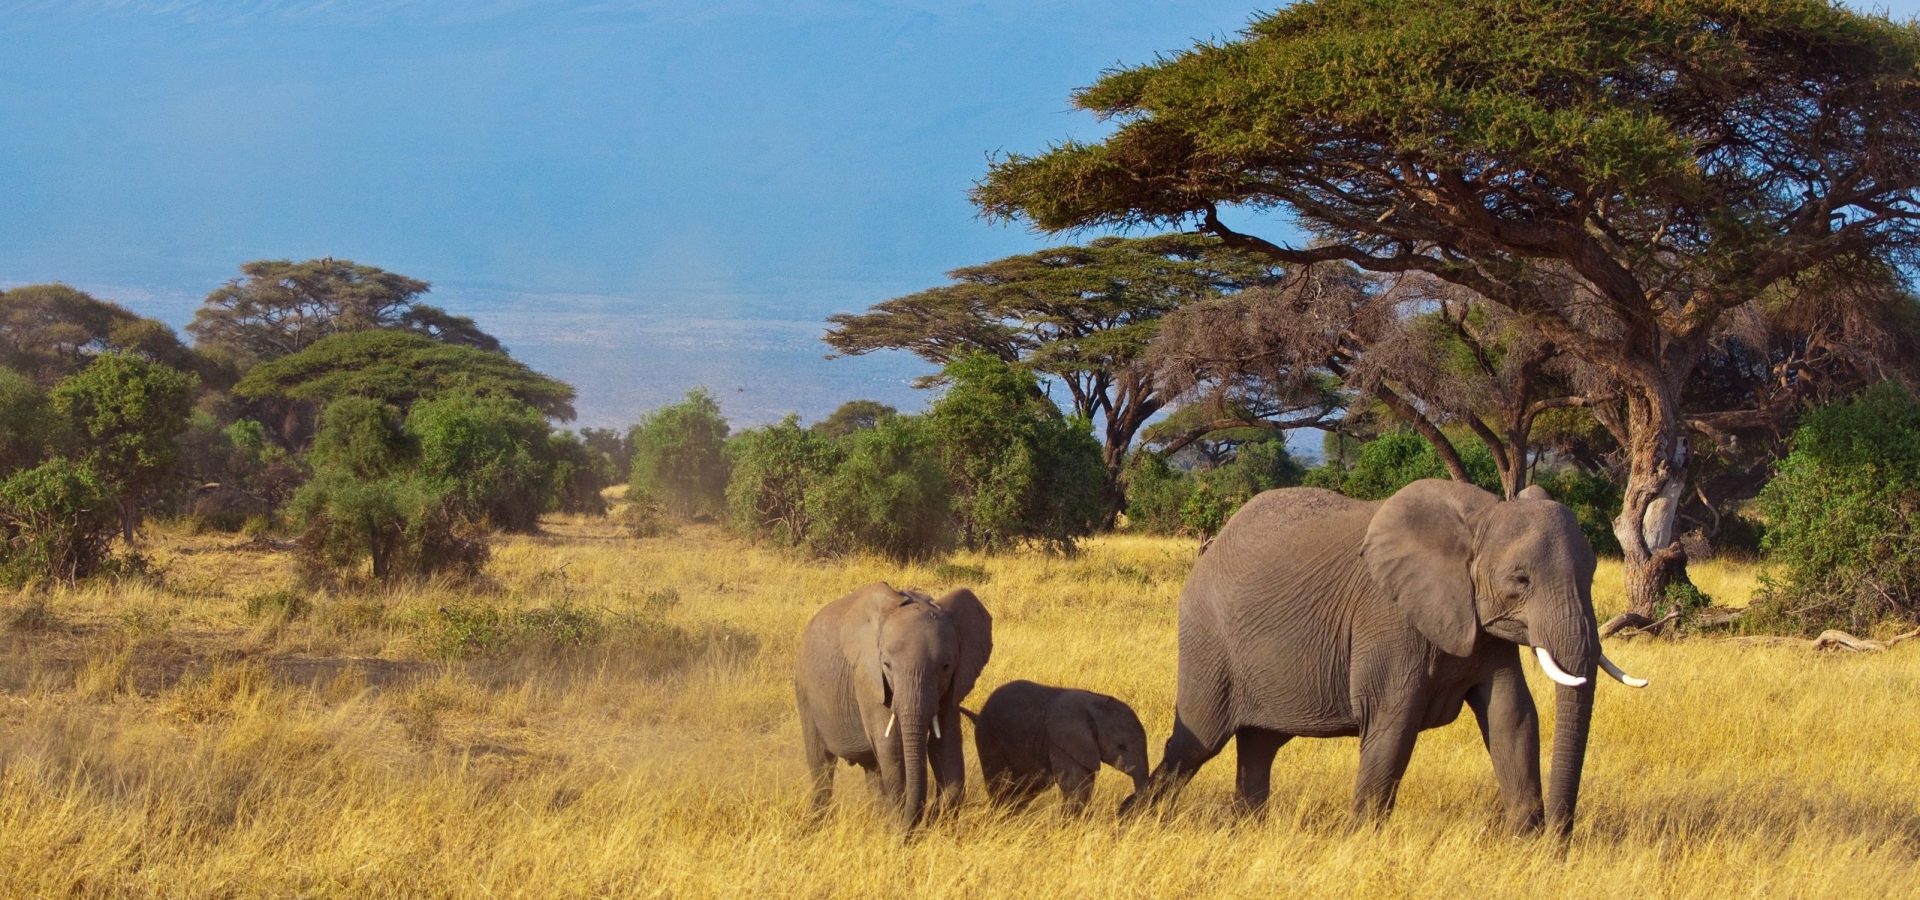 research topics in tourism in kenya